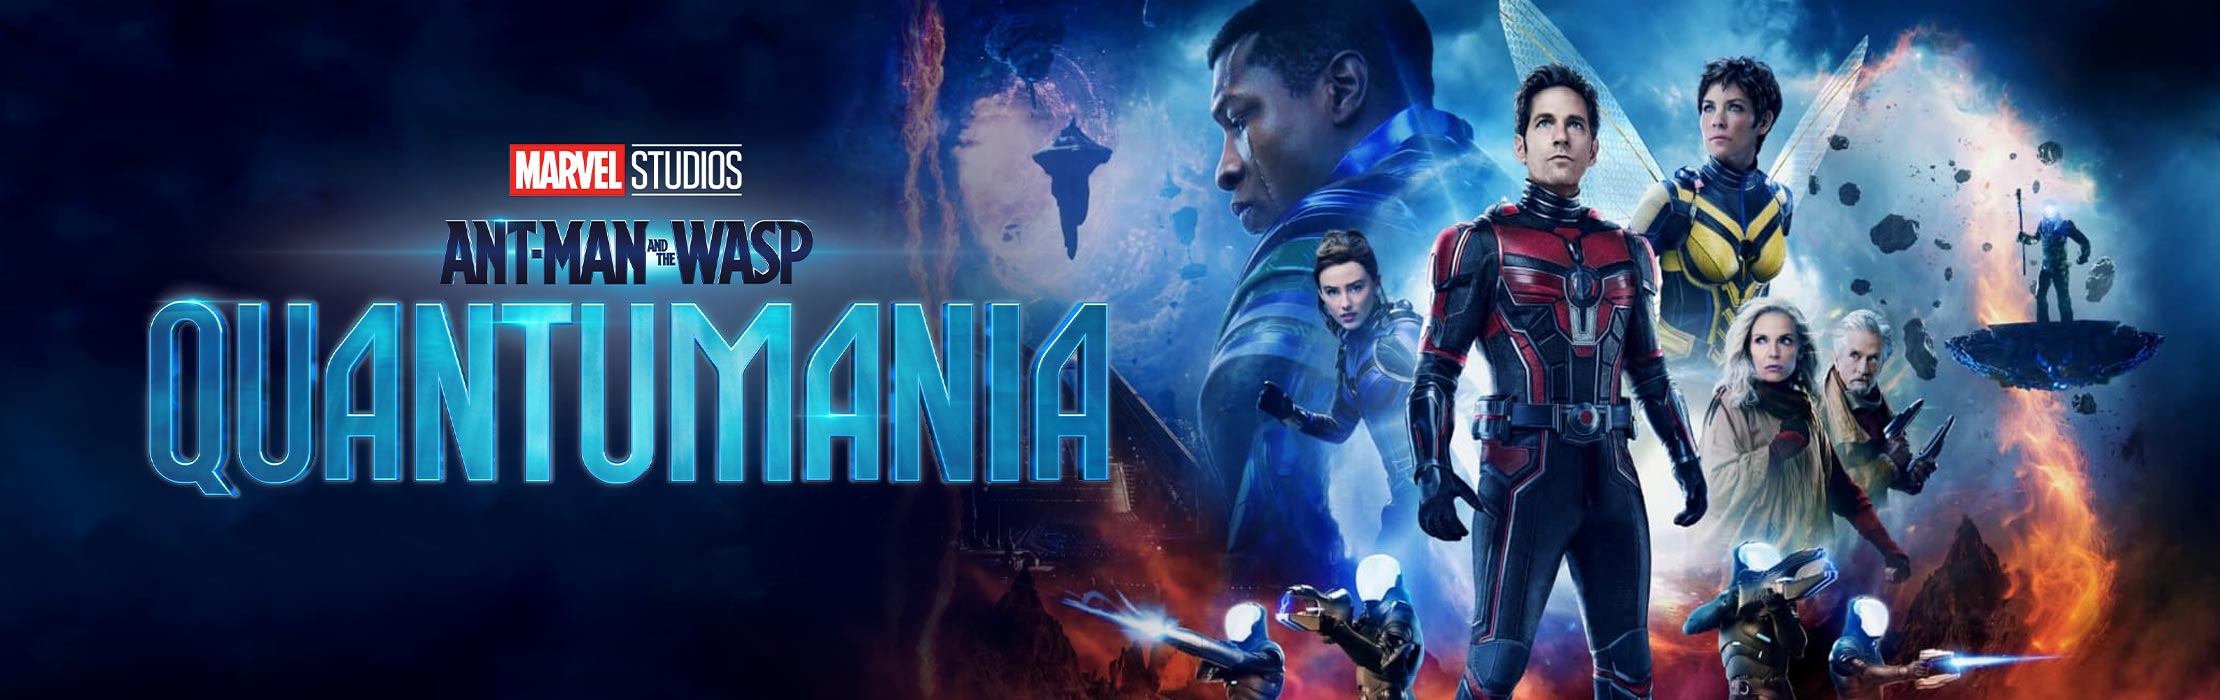 /film/Antman-and-the-Wasp:-Quantumania